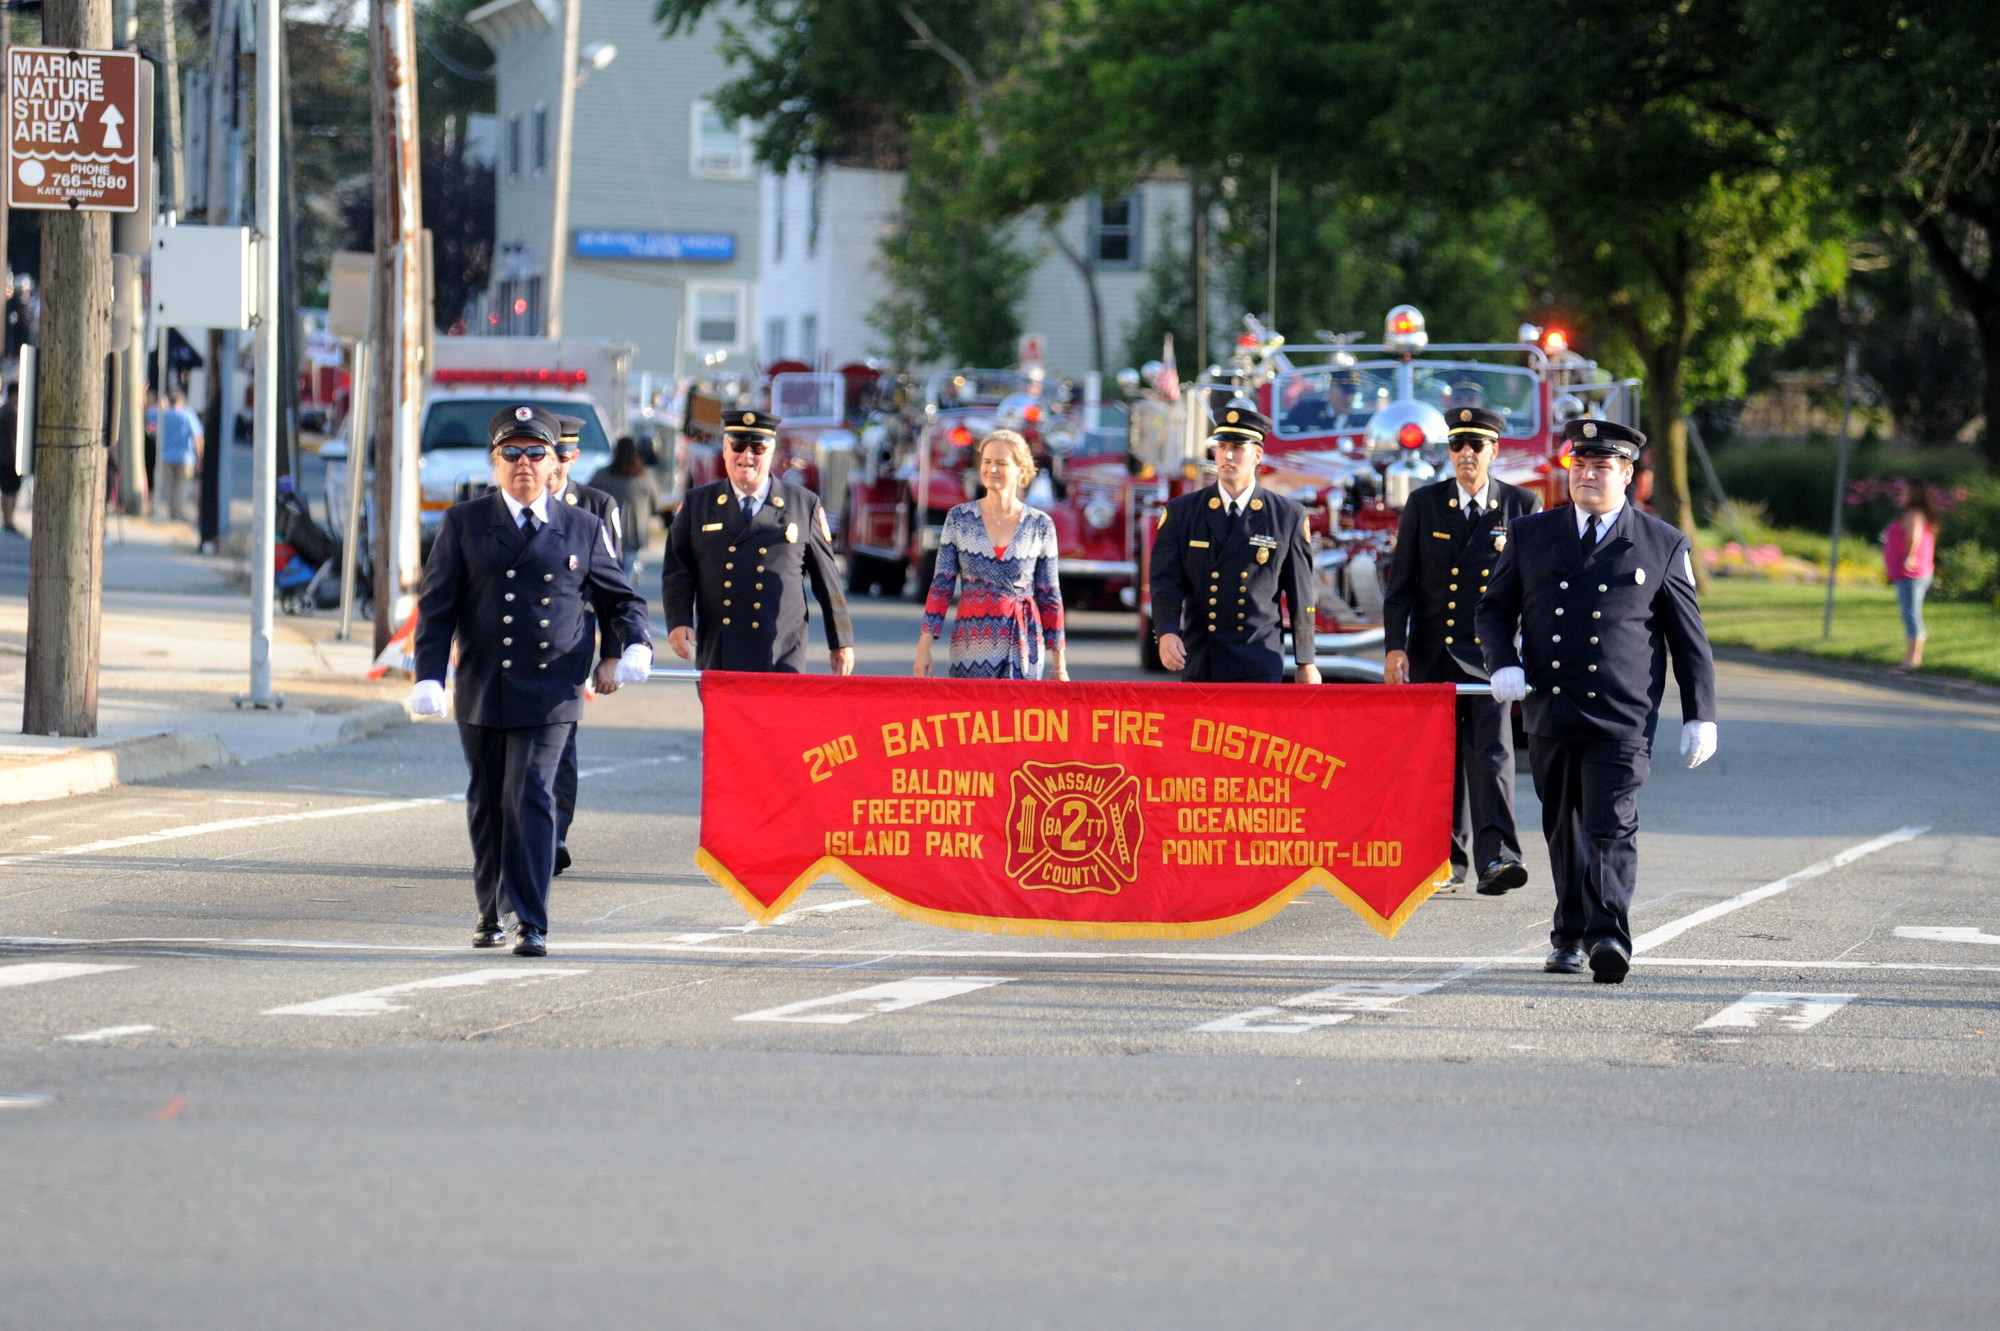 Volunteers from fire departments throughout south Nassau marched in the second annual Battalion Volunteer Firefighters’ parade in Baldwin.